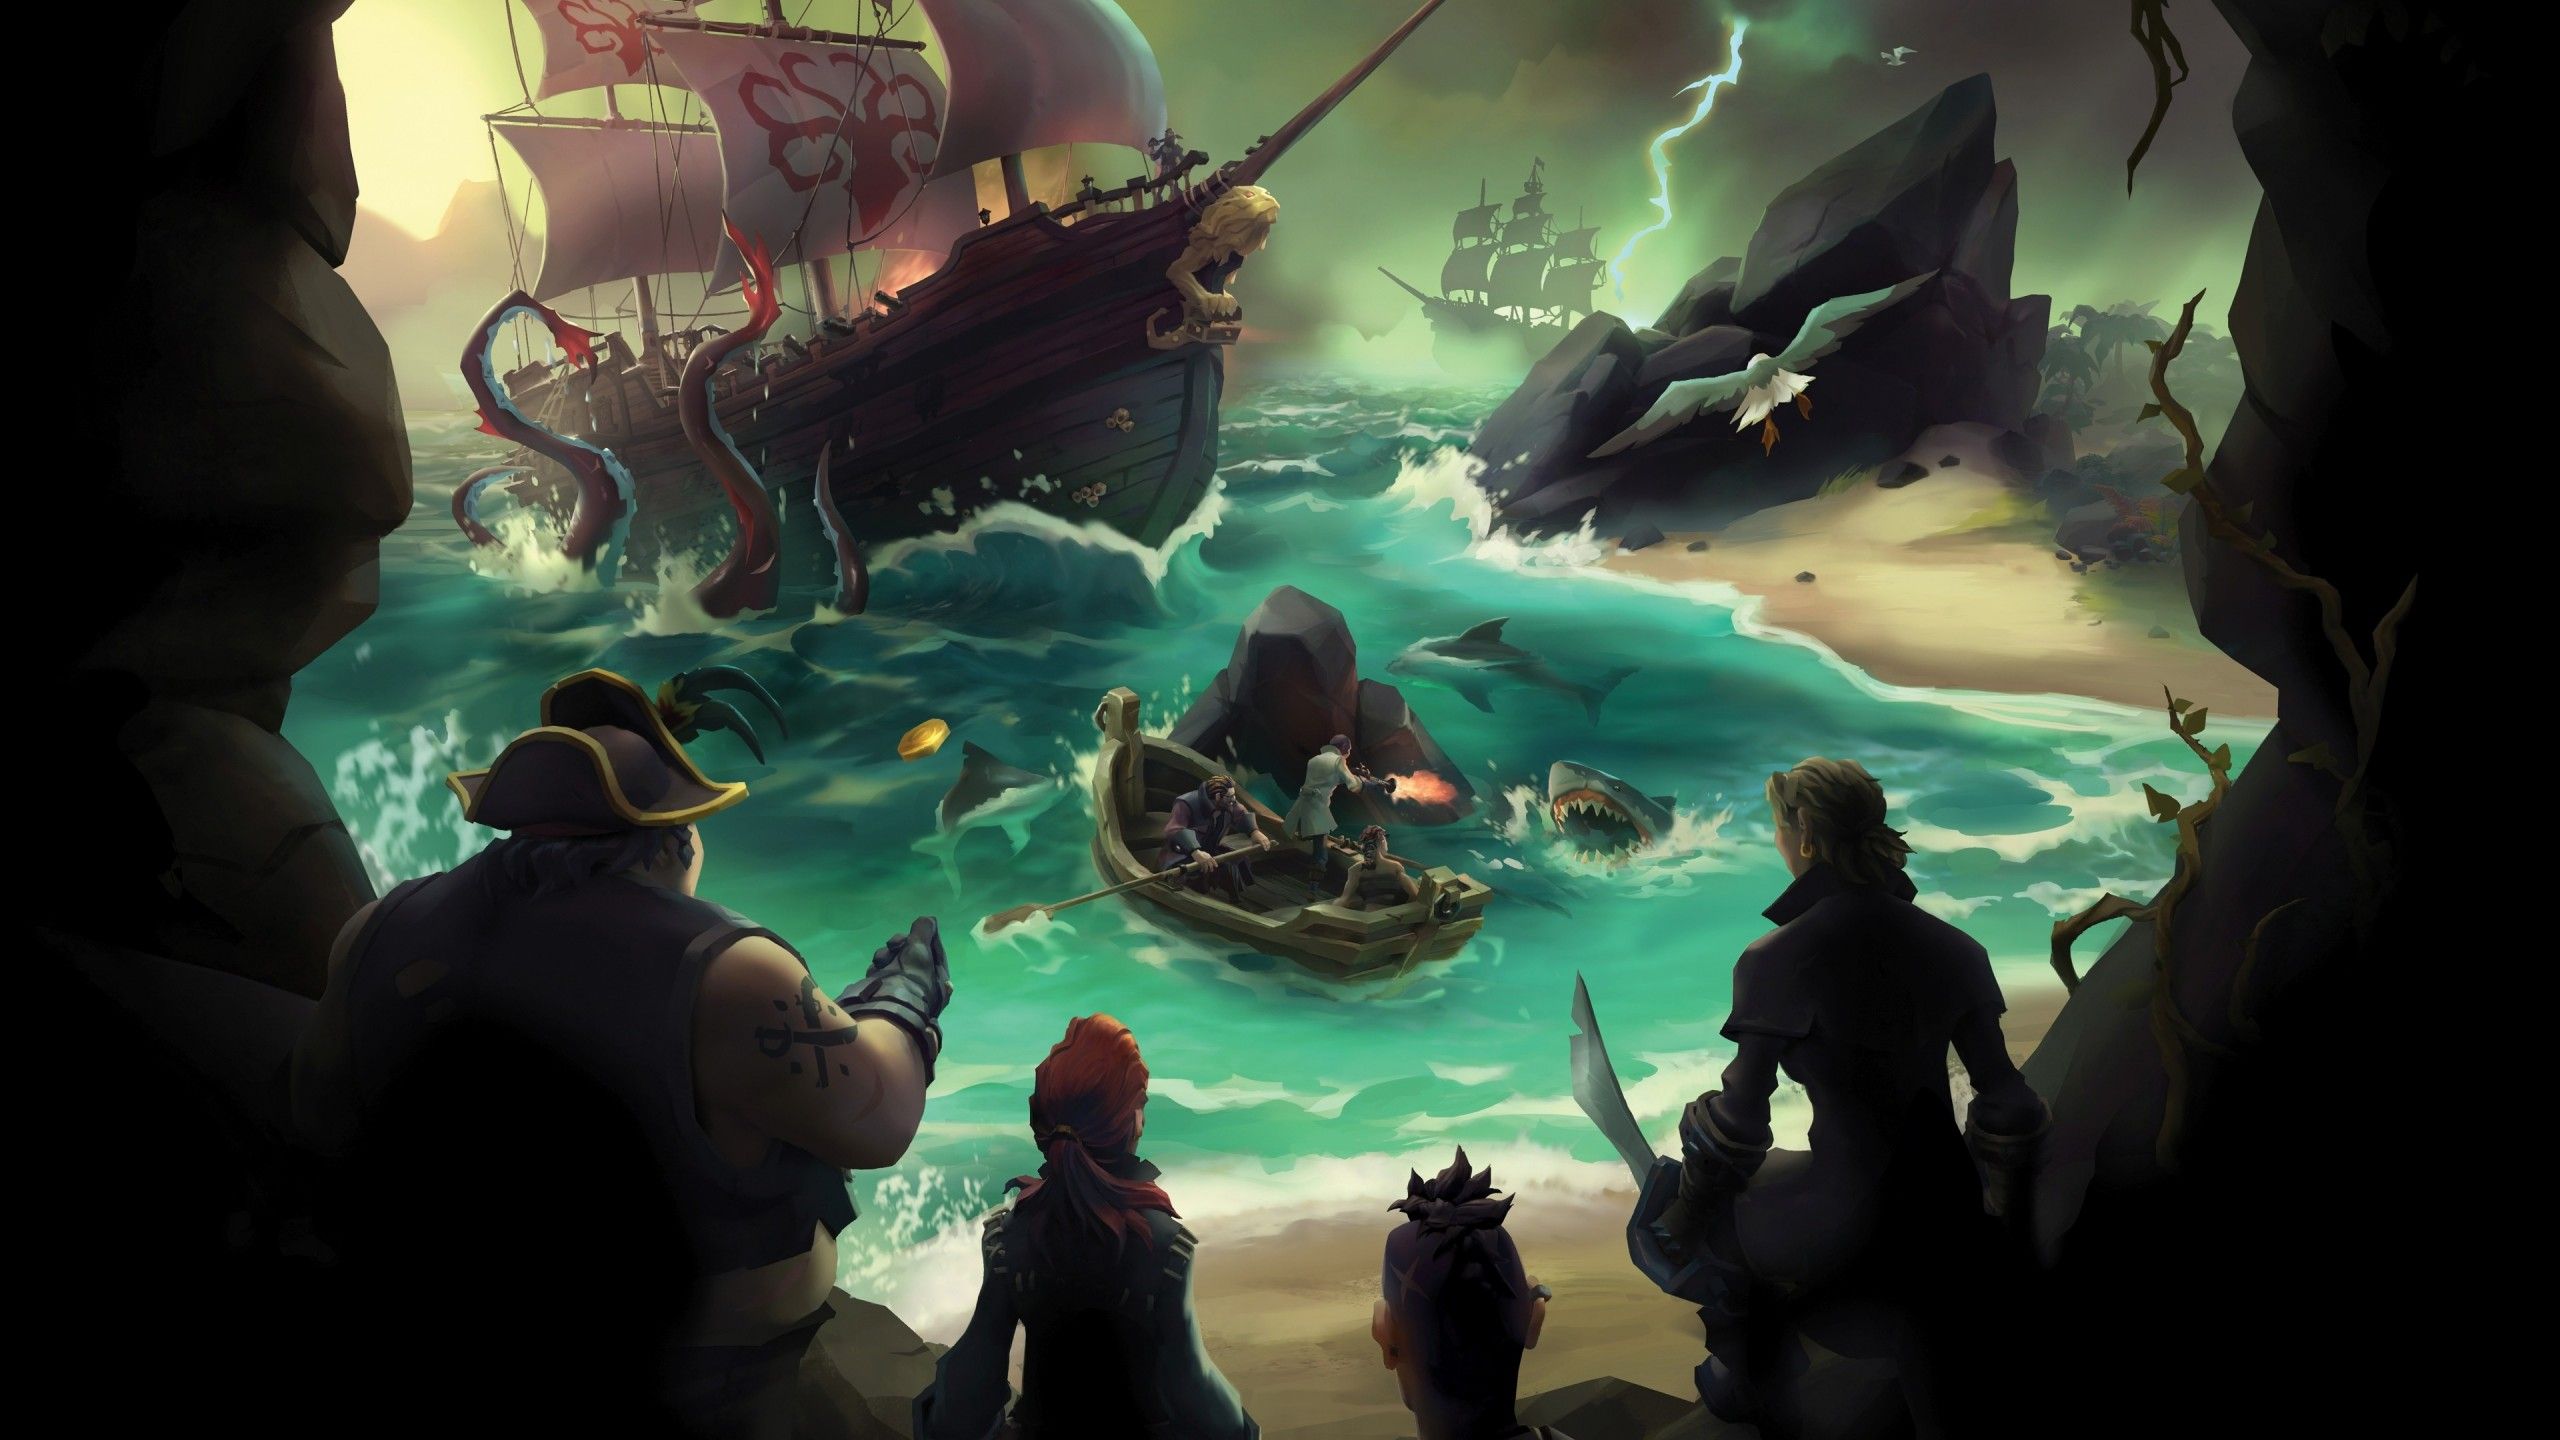 Wallpaper Sea of Thieves, Gamescom pirates, best games, pc, ps xbox one, Games